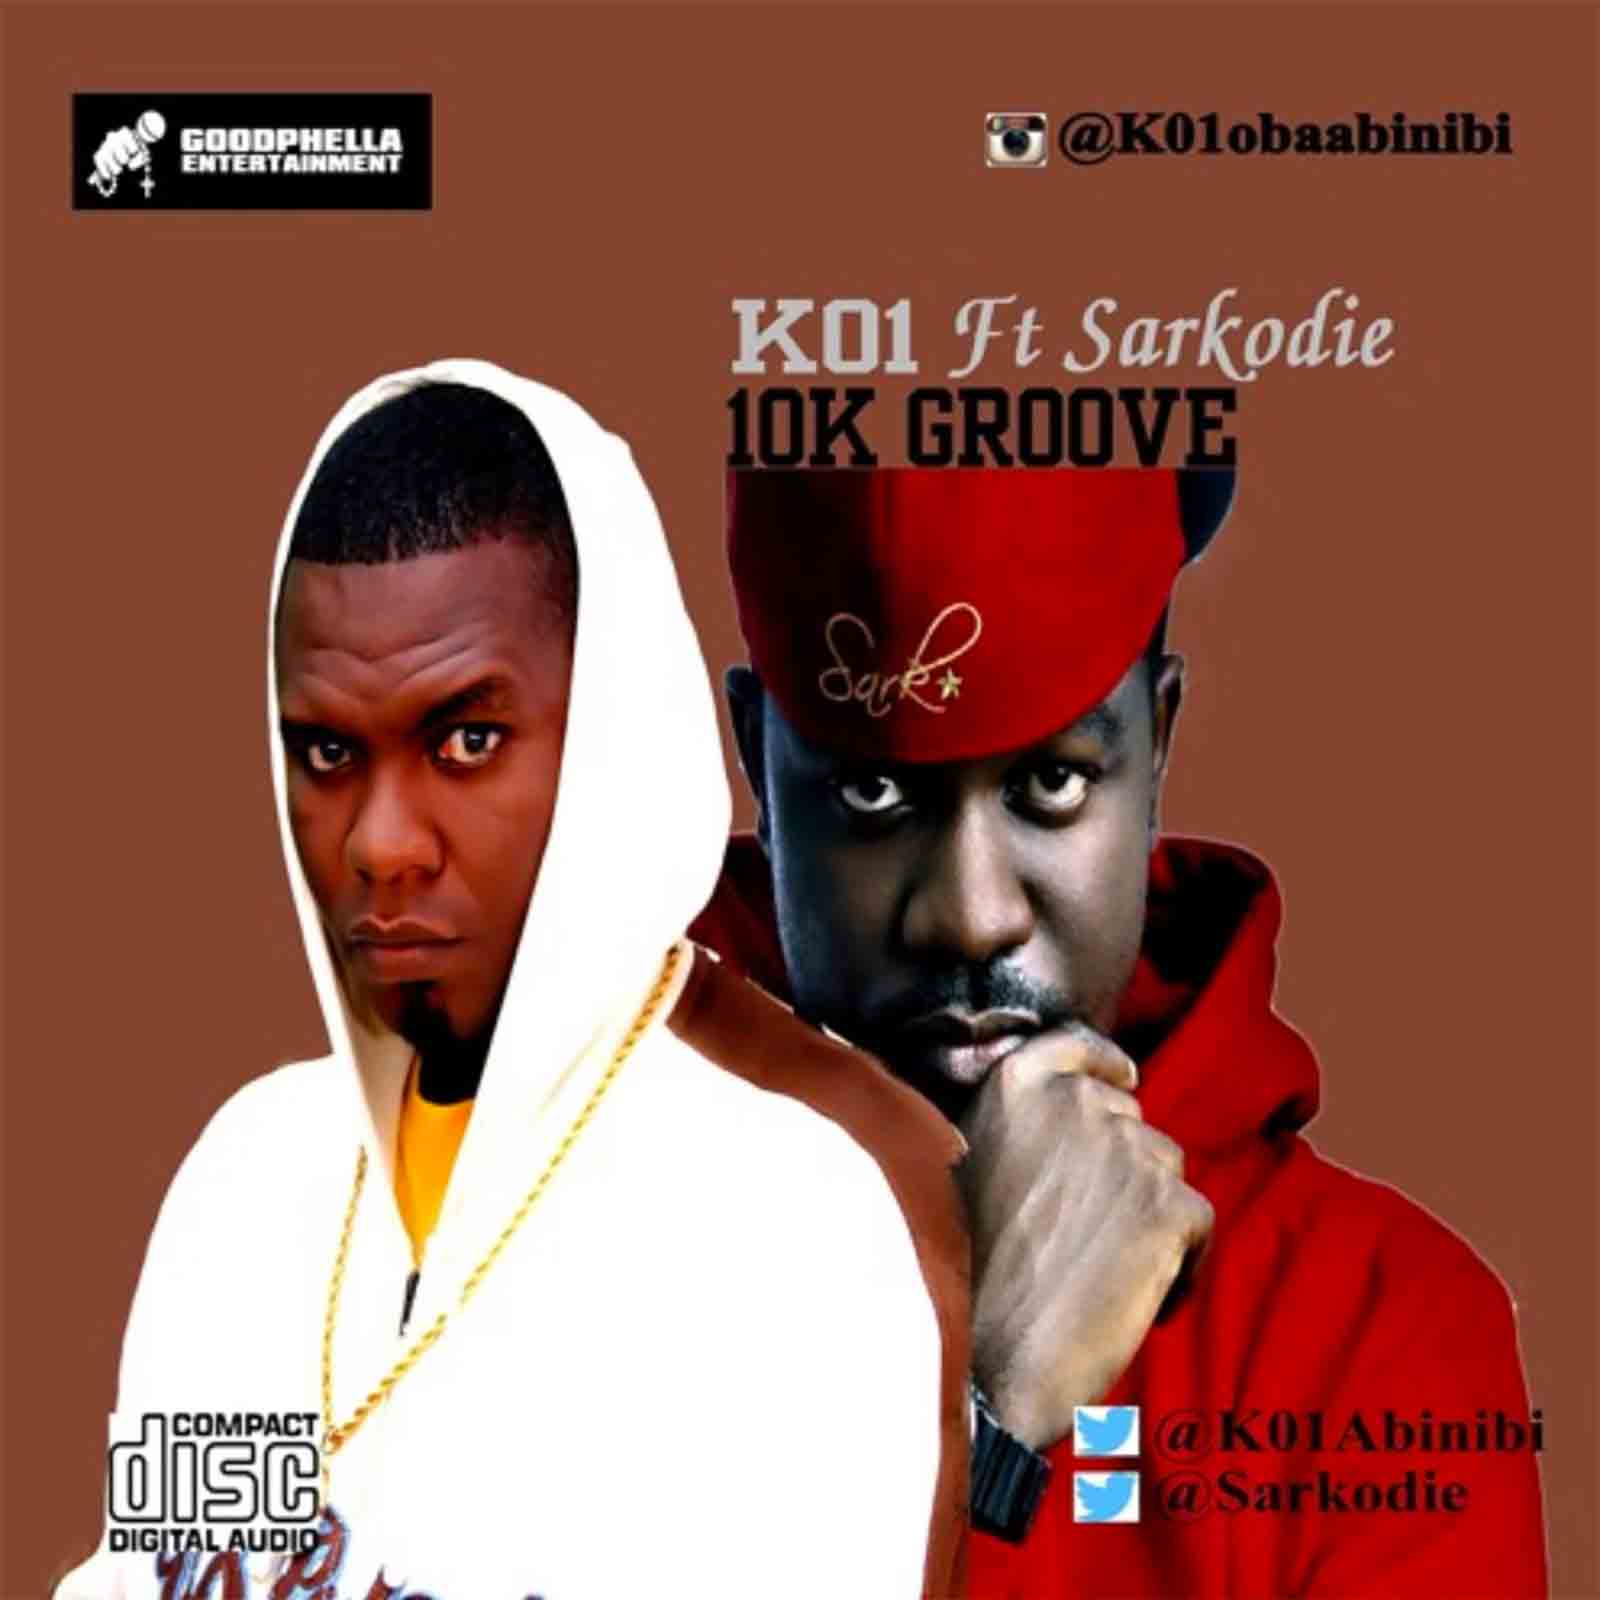 10k Groove by K01 feat. Sarkodie